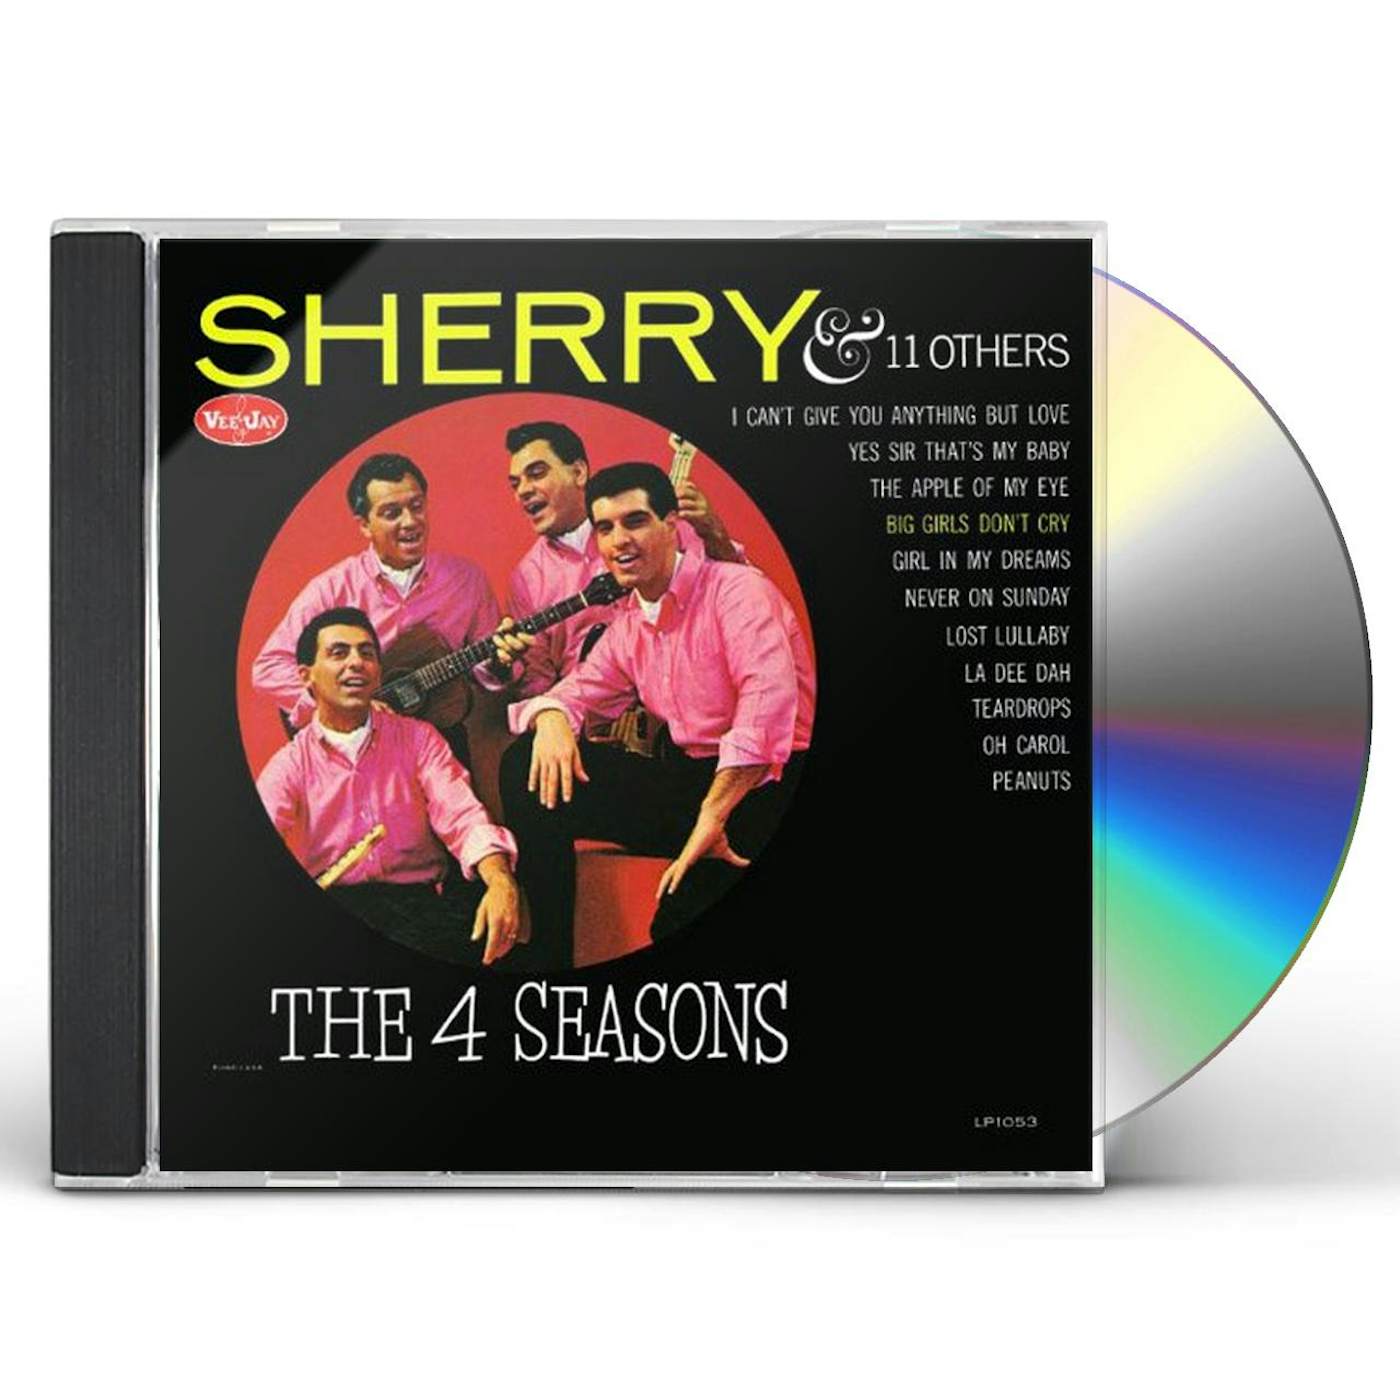 Four Seasons SHERRY & 11 OTHERS (LIMITED MONO MINI LP SLEEVE) CD